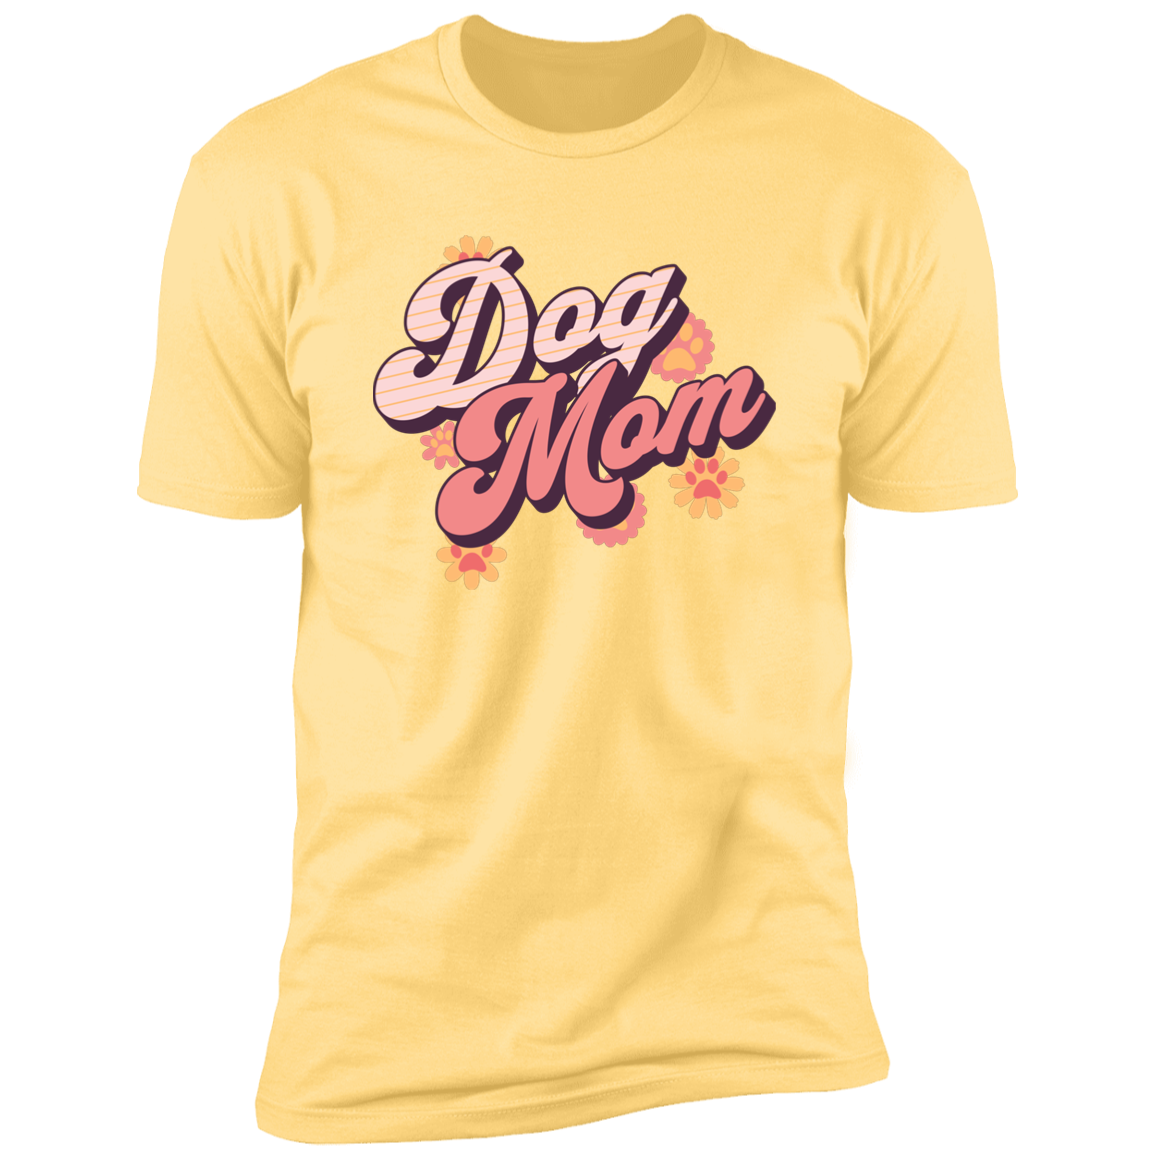 Retro Dog Mom t-shirt, Dog Mom shirt, Dog T-shirt for humans, in banana cream